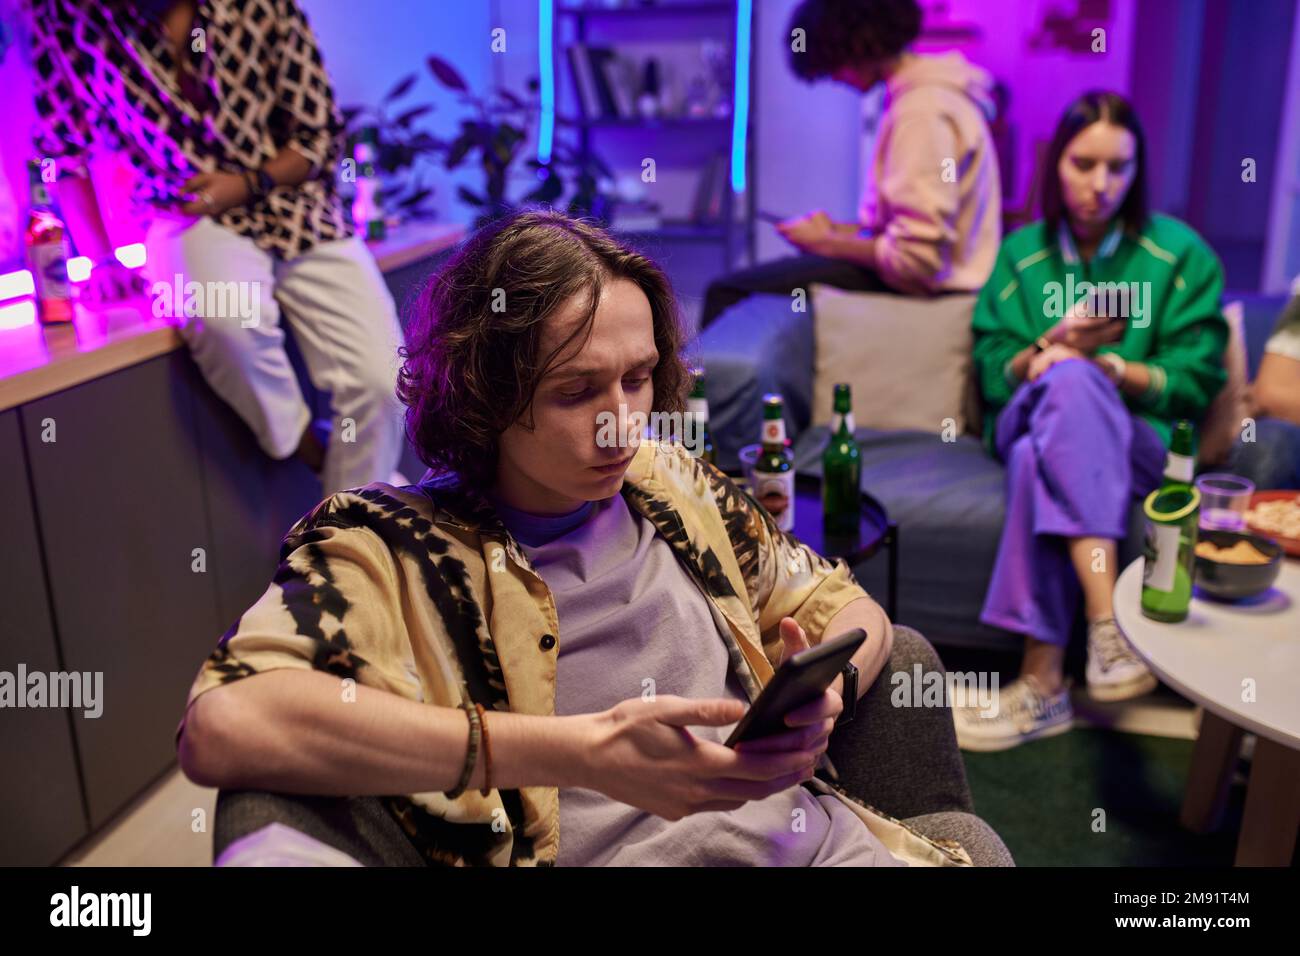 Serious guy in casualwear watching online video or scrolling through new posts in smartphone while relaxing among friends at home party Stock Photo